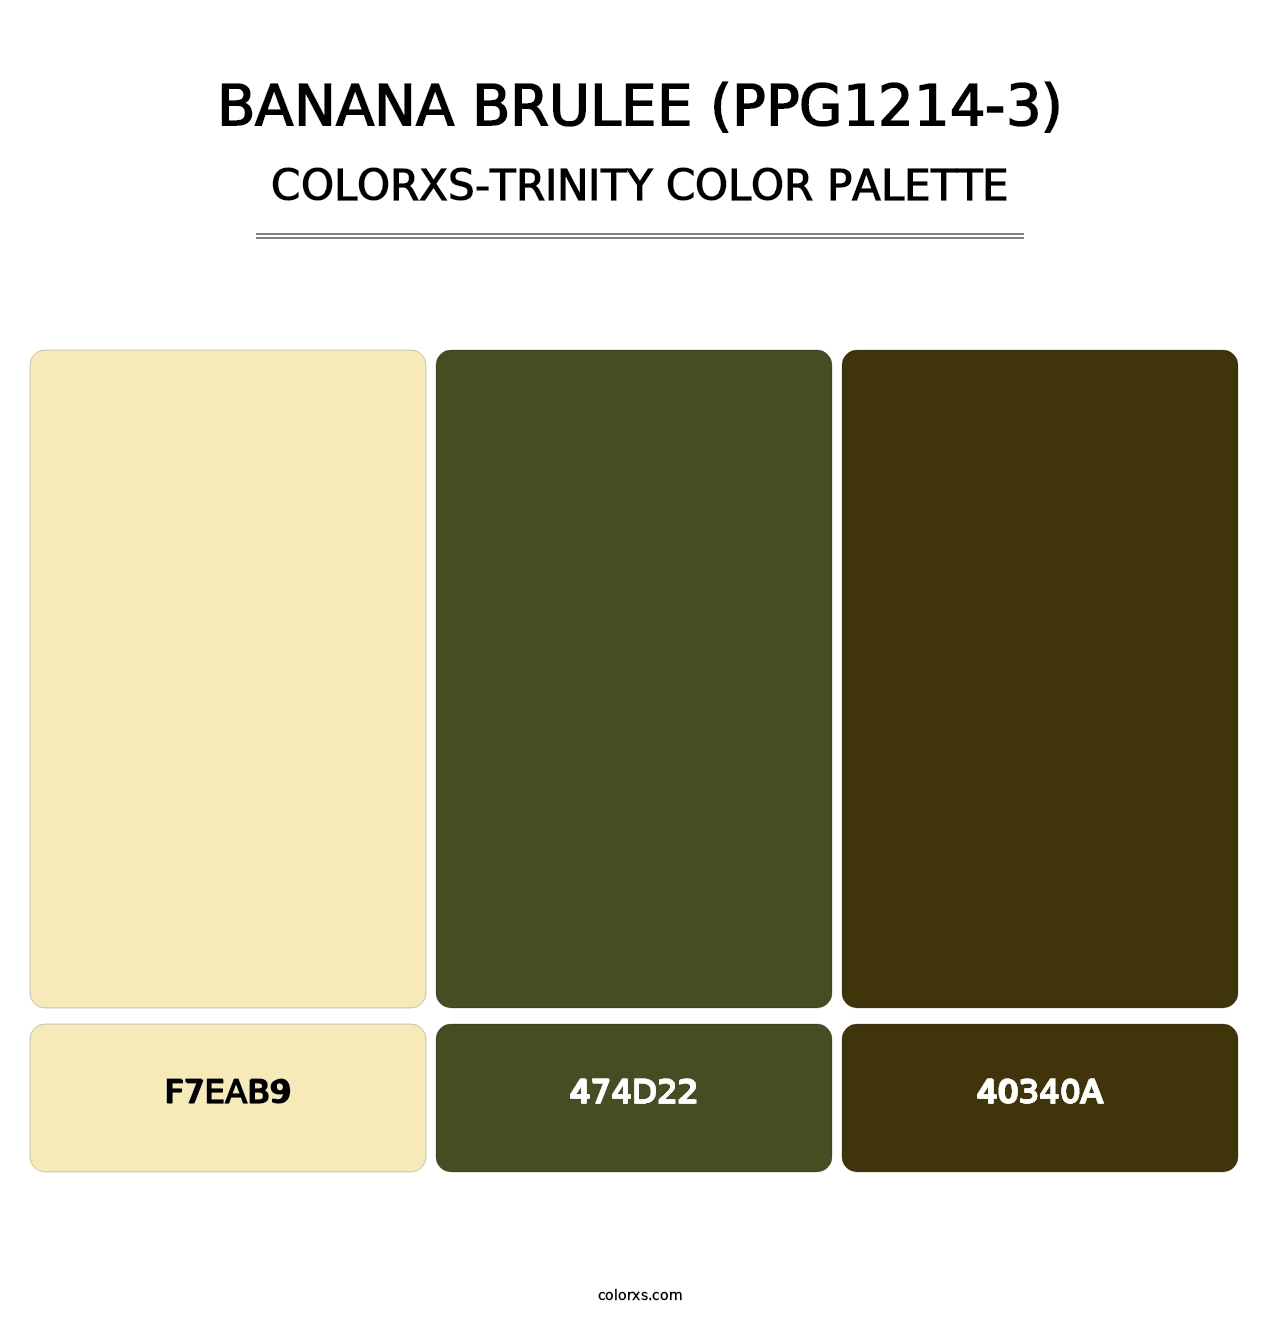 Banana Brulee (PPG1214-3) - Colorxs Trinity Palette